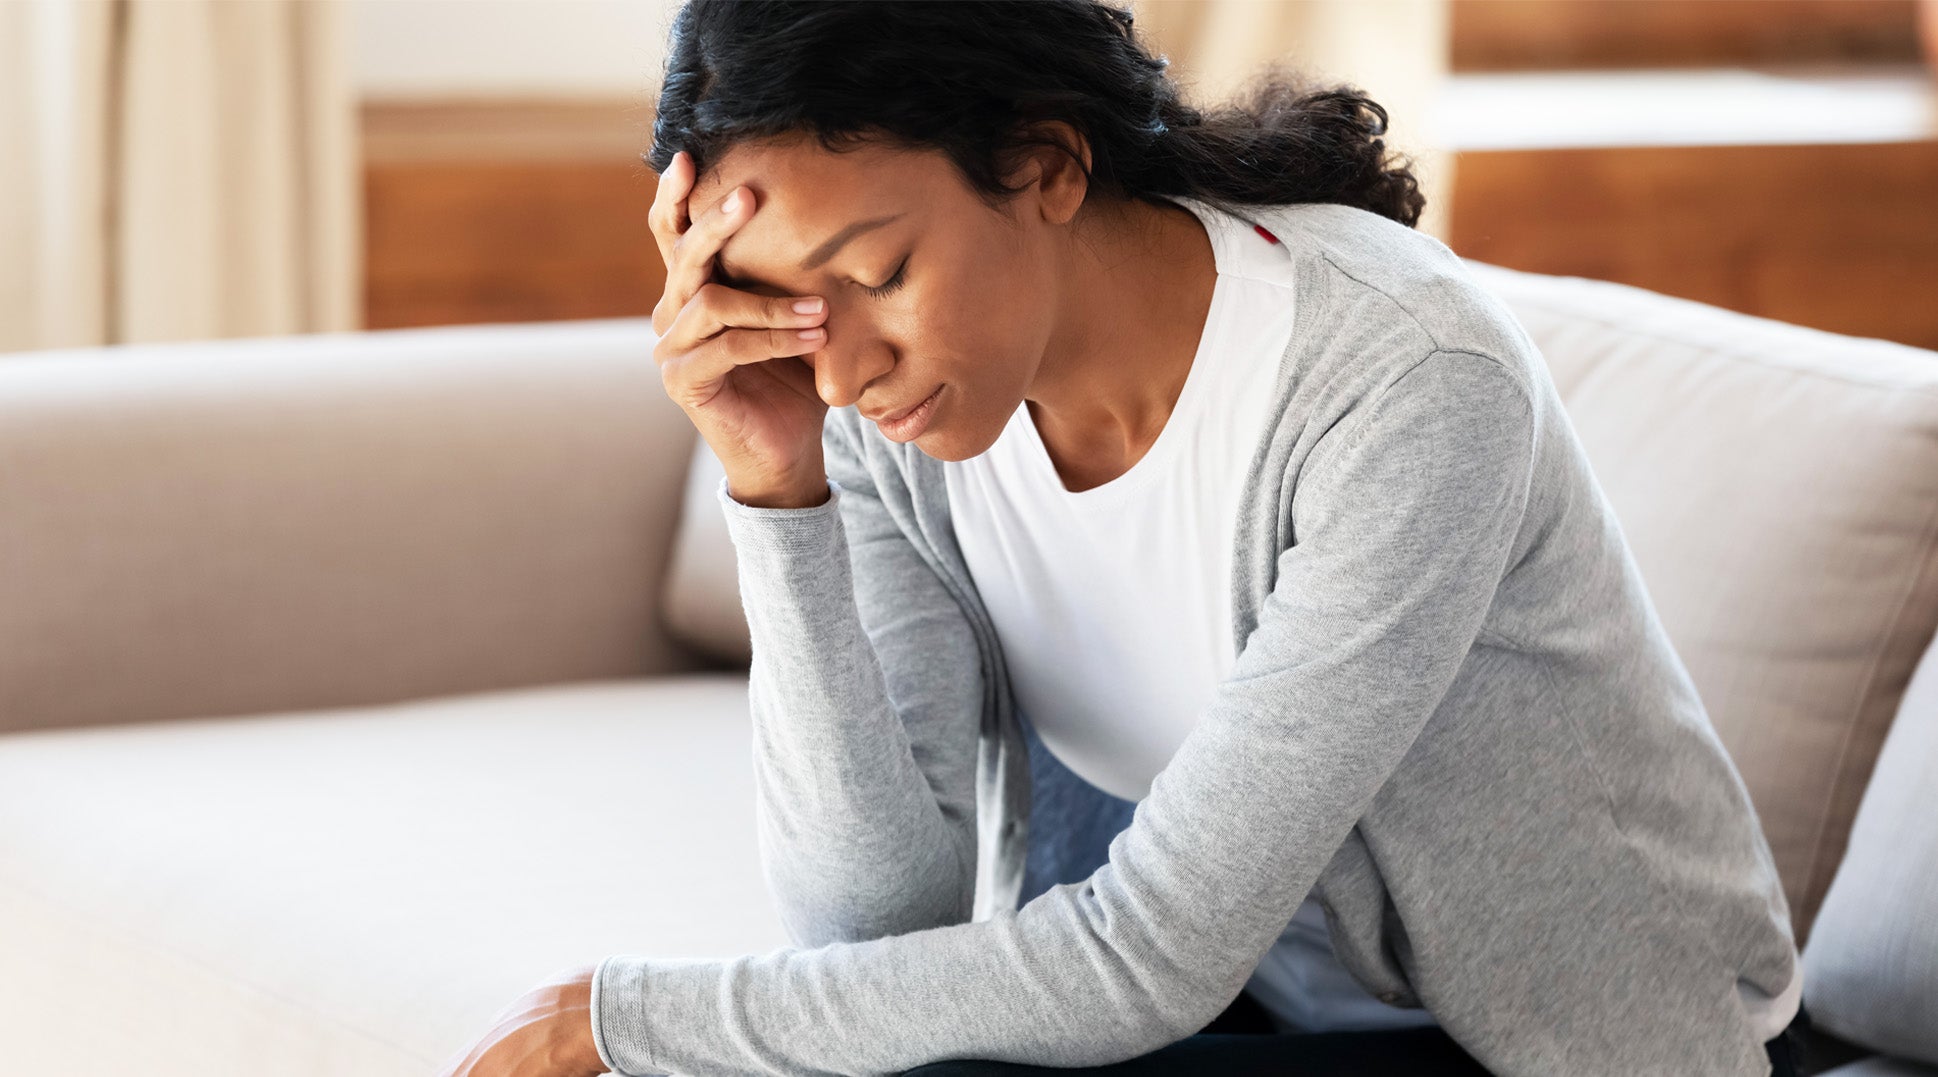 Can Postpartum Depression Happen After a Miscarriage?